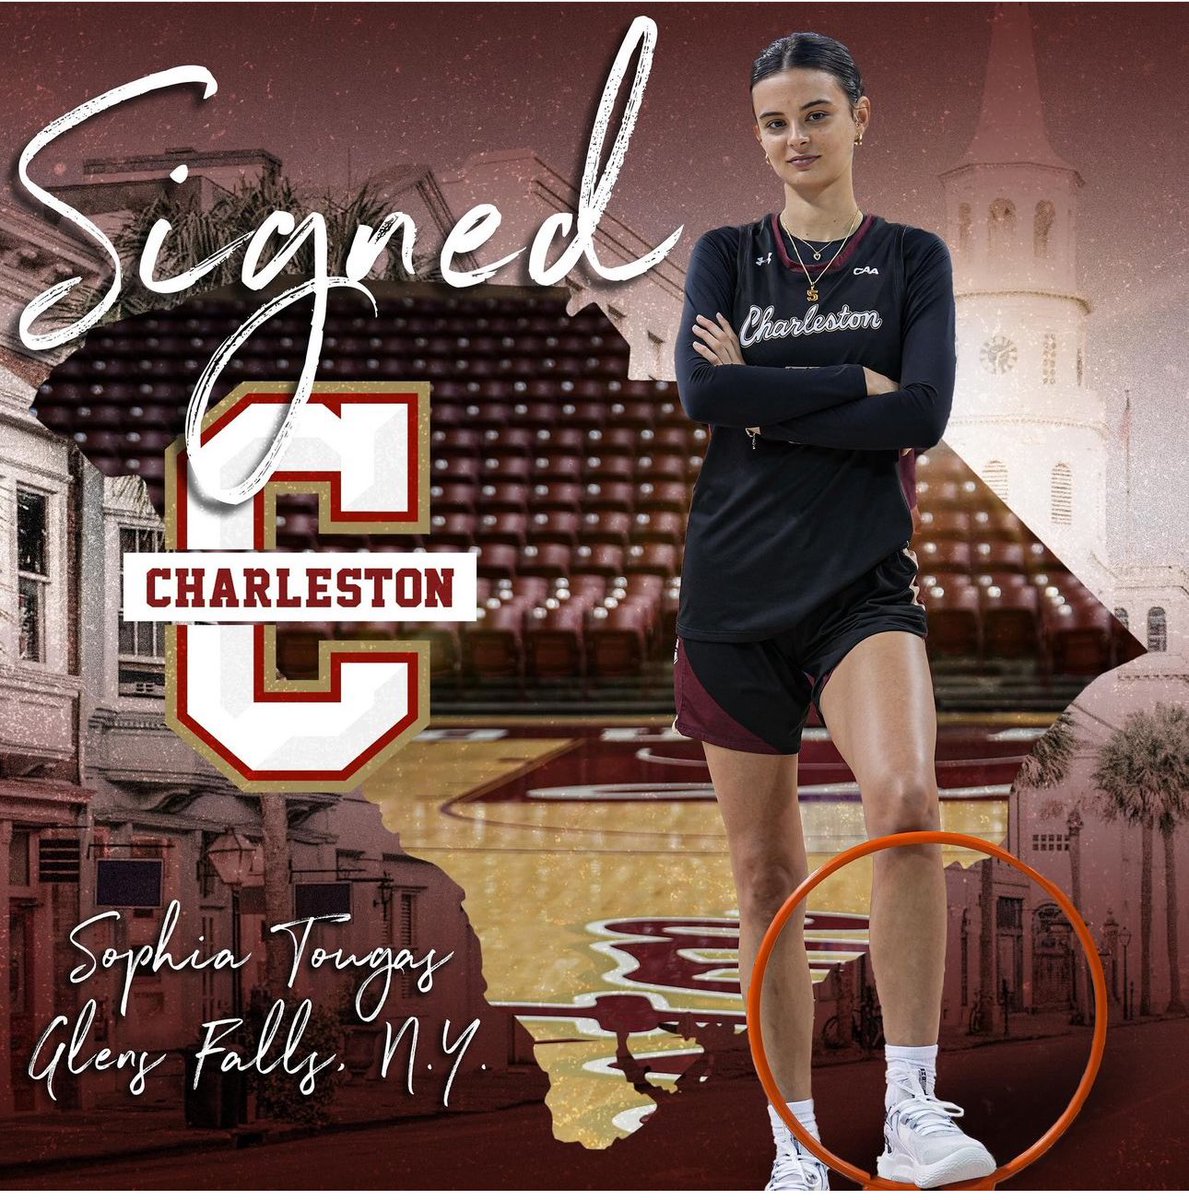 Congratulations on alum @sophietoug on her commitment to College of Charleston @CofCWBB @IAMCoachU1 @NEPSGBCA @WomensHoops_USA @NYSTakeover #WeAre..